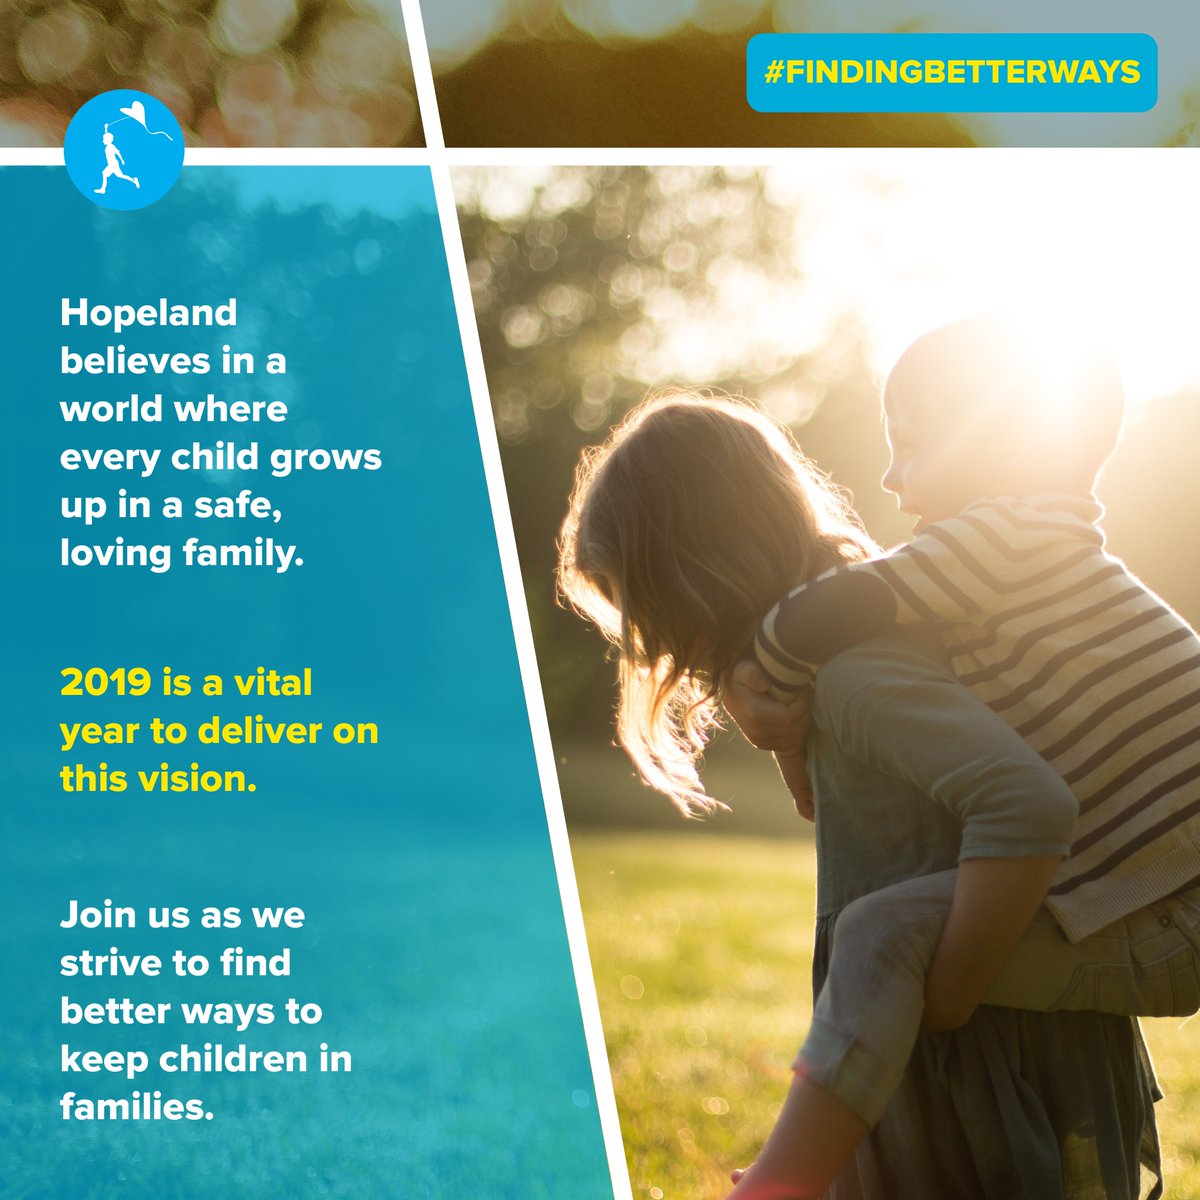 2019 is a vital year for the rights of the child - join #Hopeland in our vision of a world where every child grows up in a safe, loving #family #findingbetterways